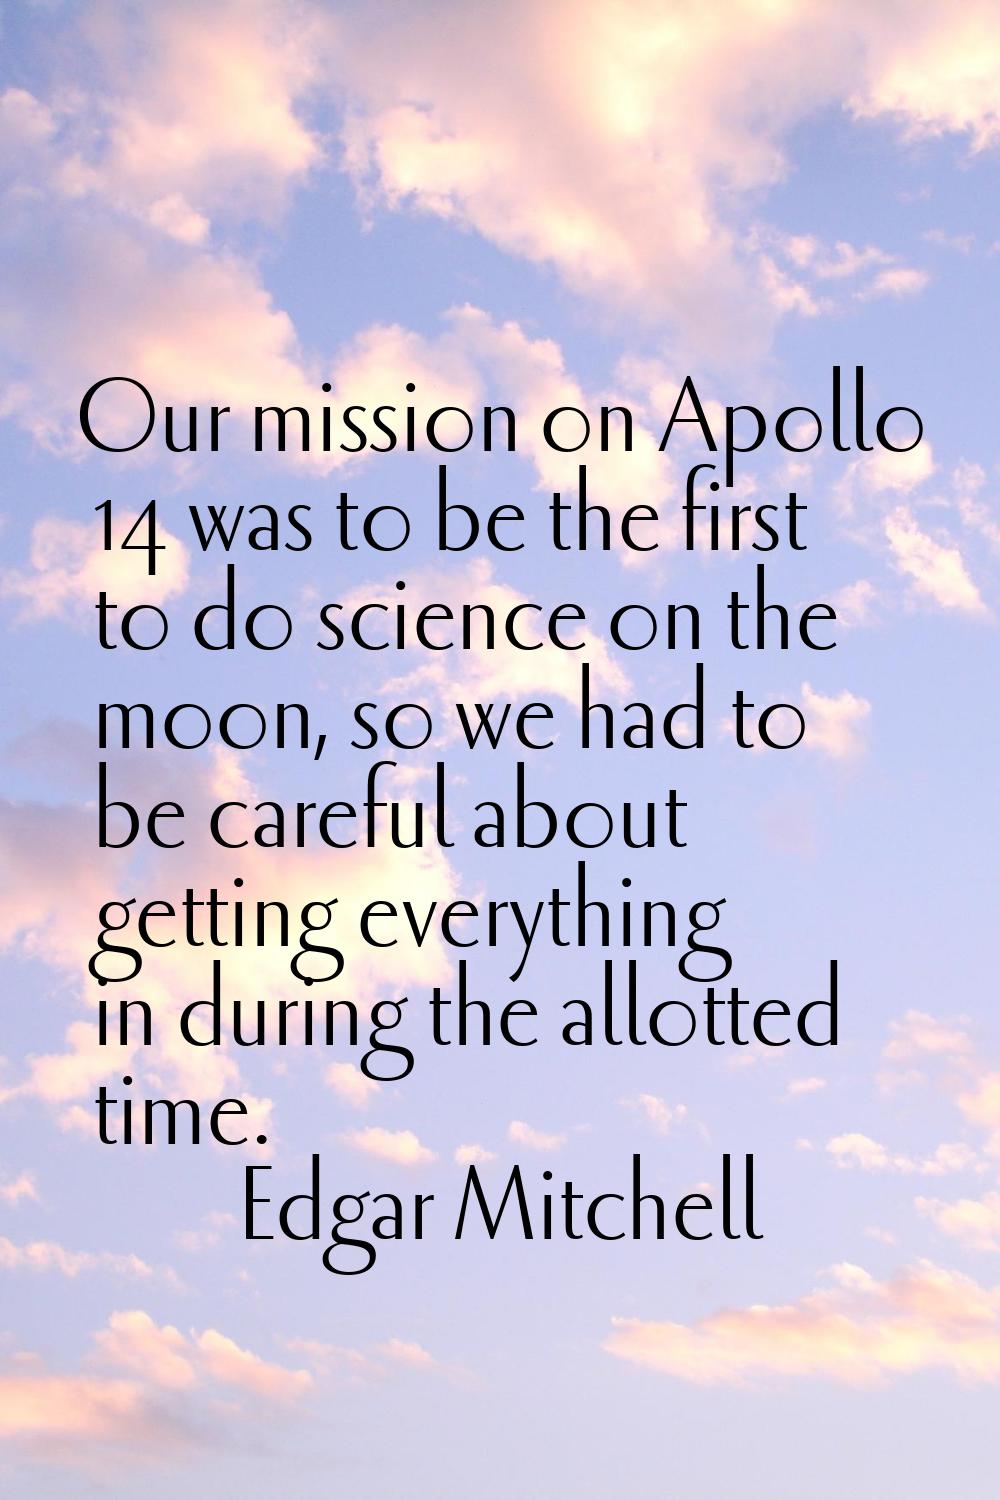 Our mission on Apollo 14 was to be the first to do science on the moon, so we had to be careful abo